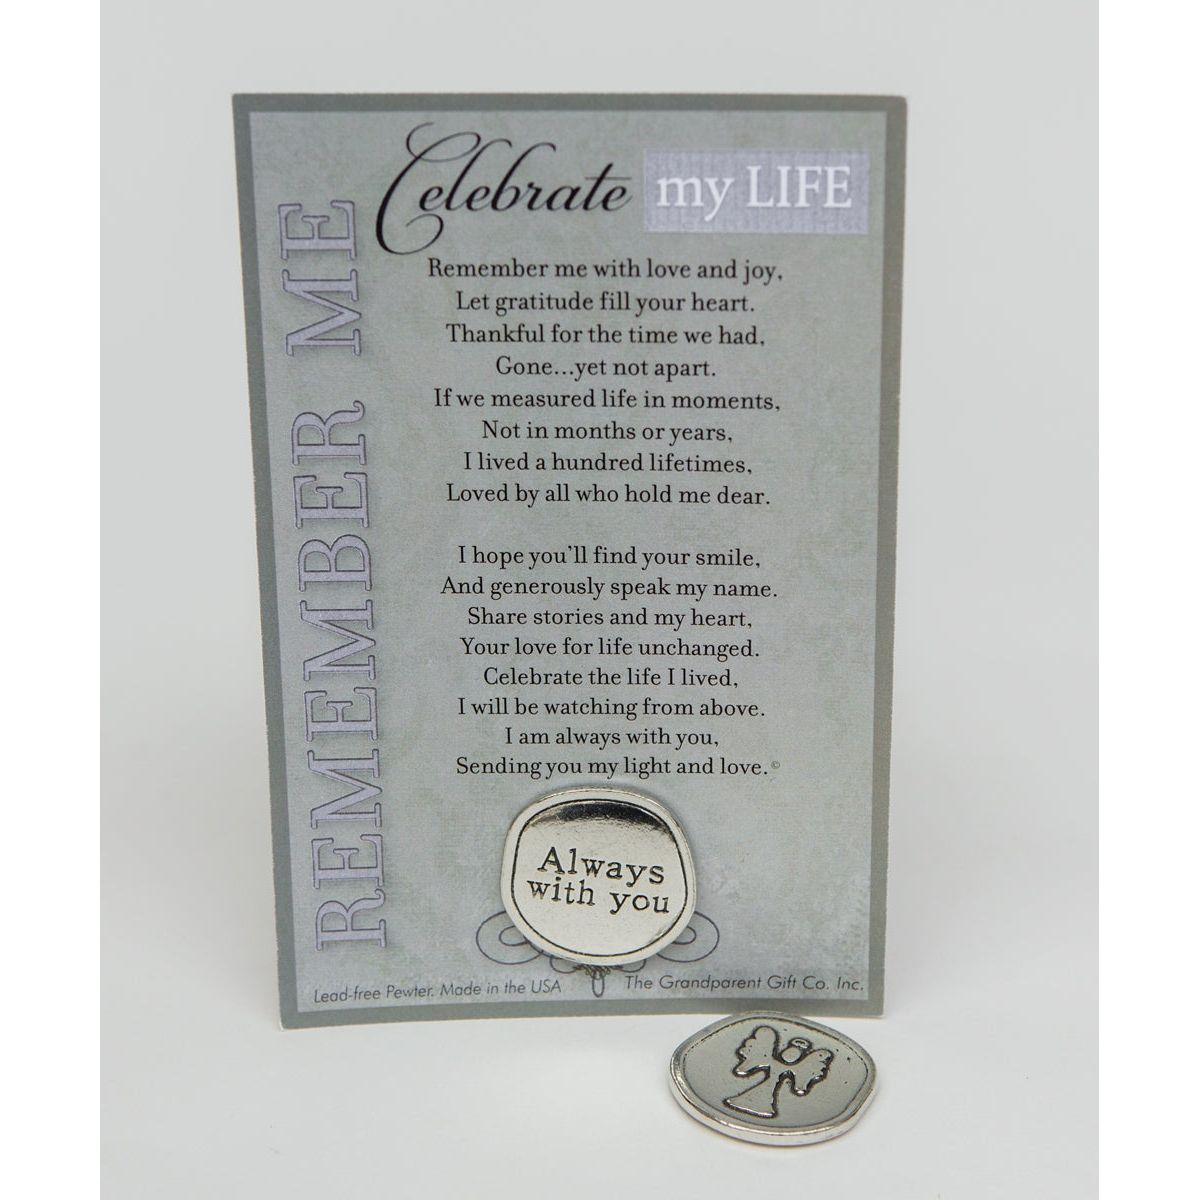 Memorial Gift: Handmade pewter coin with "Always with you" on one side and an angel on the other, packaged in a clear bag with "Celebration of Life" poem.